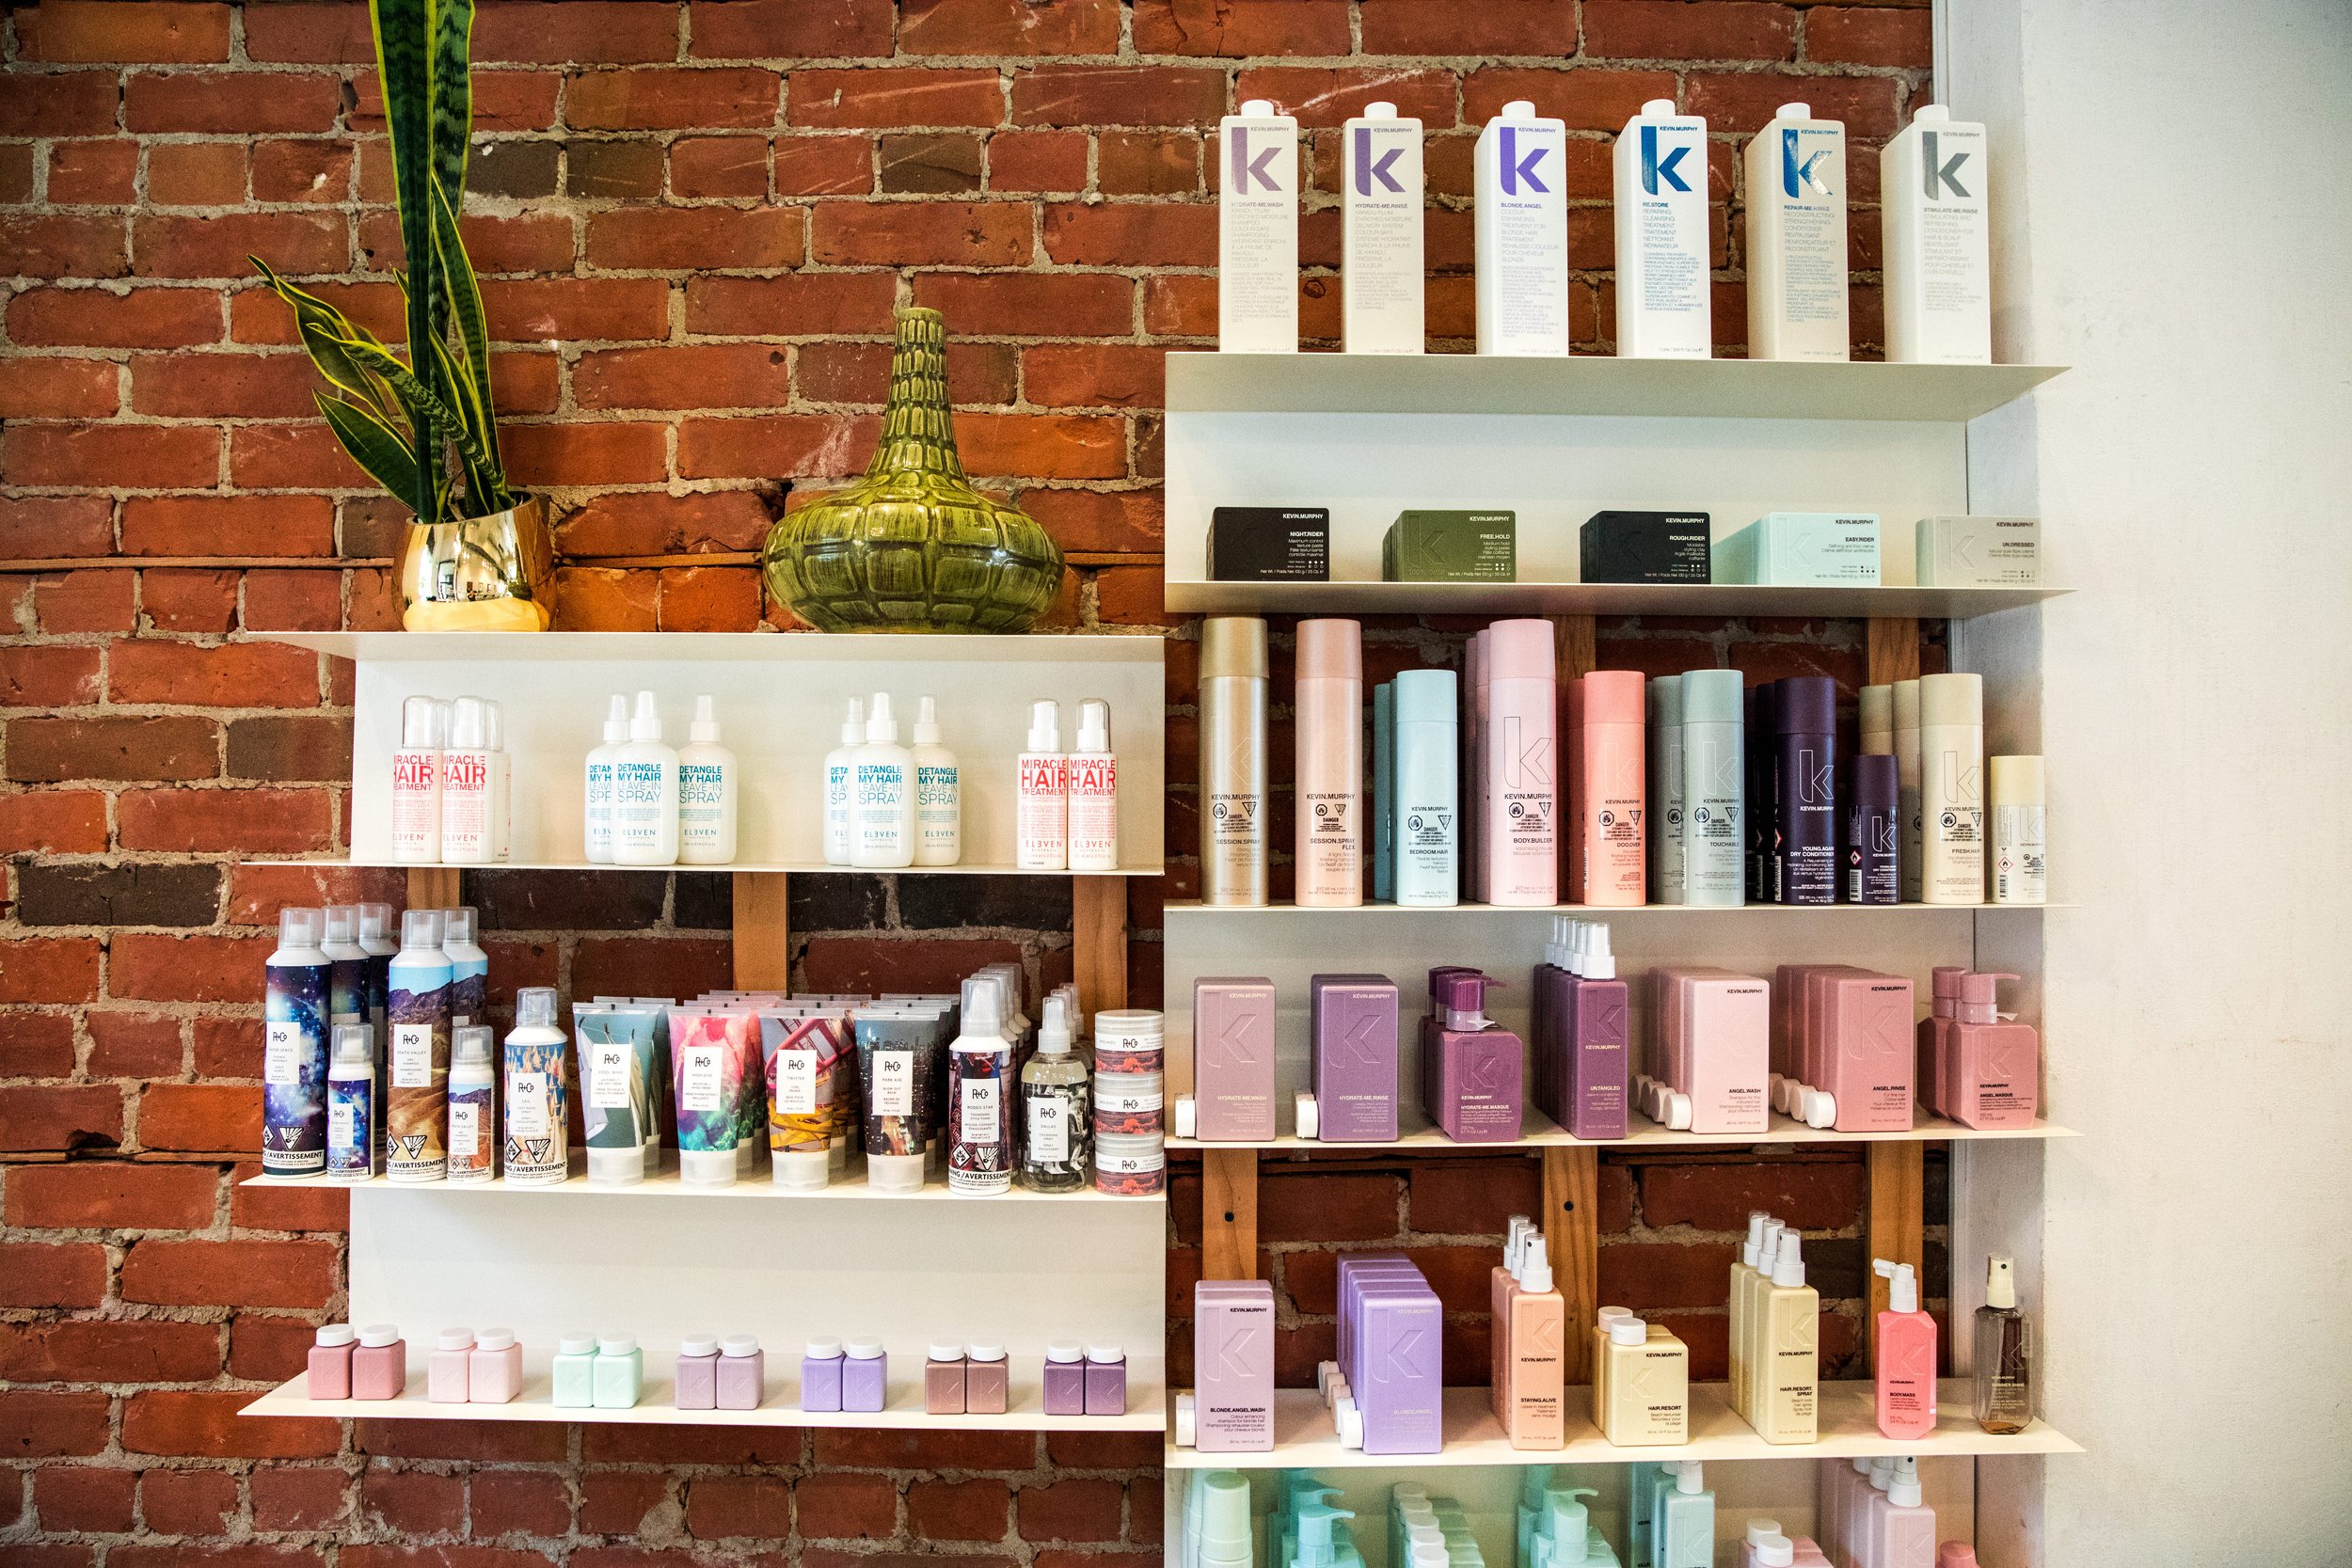 Hair products Kevin Murphy and Eleven sold in Toronto hair salon Lone and Co.